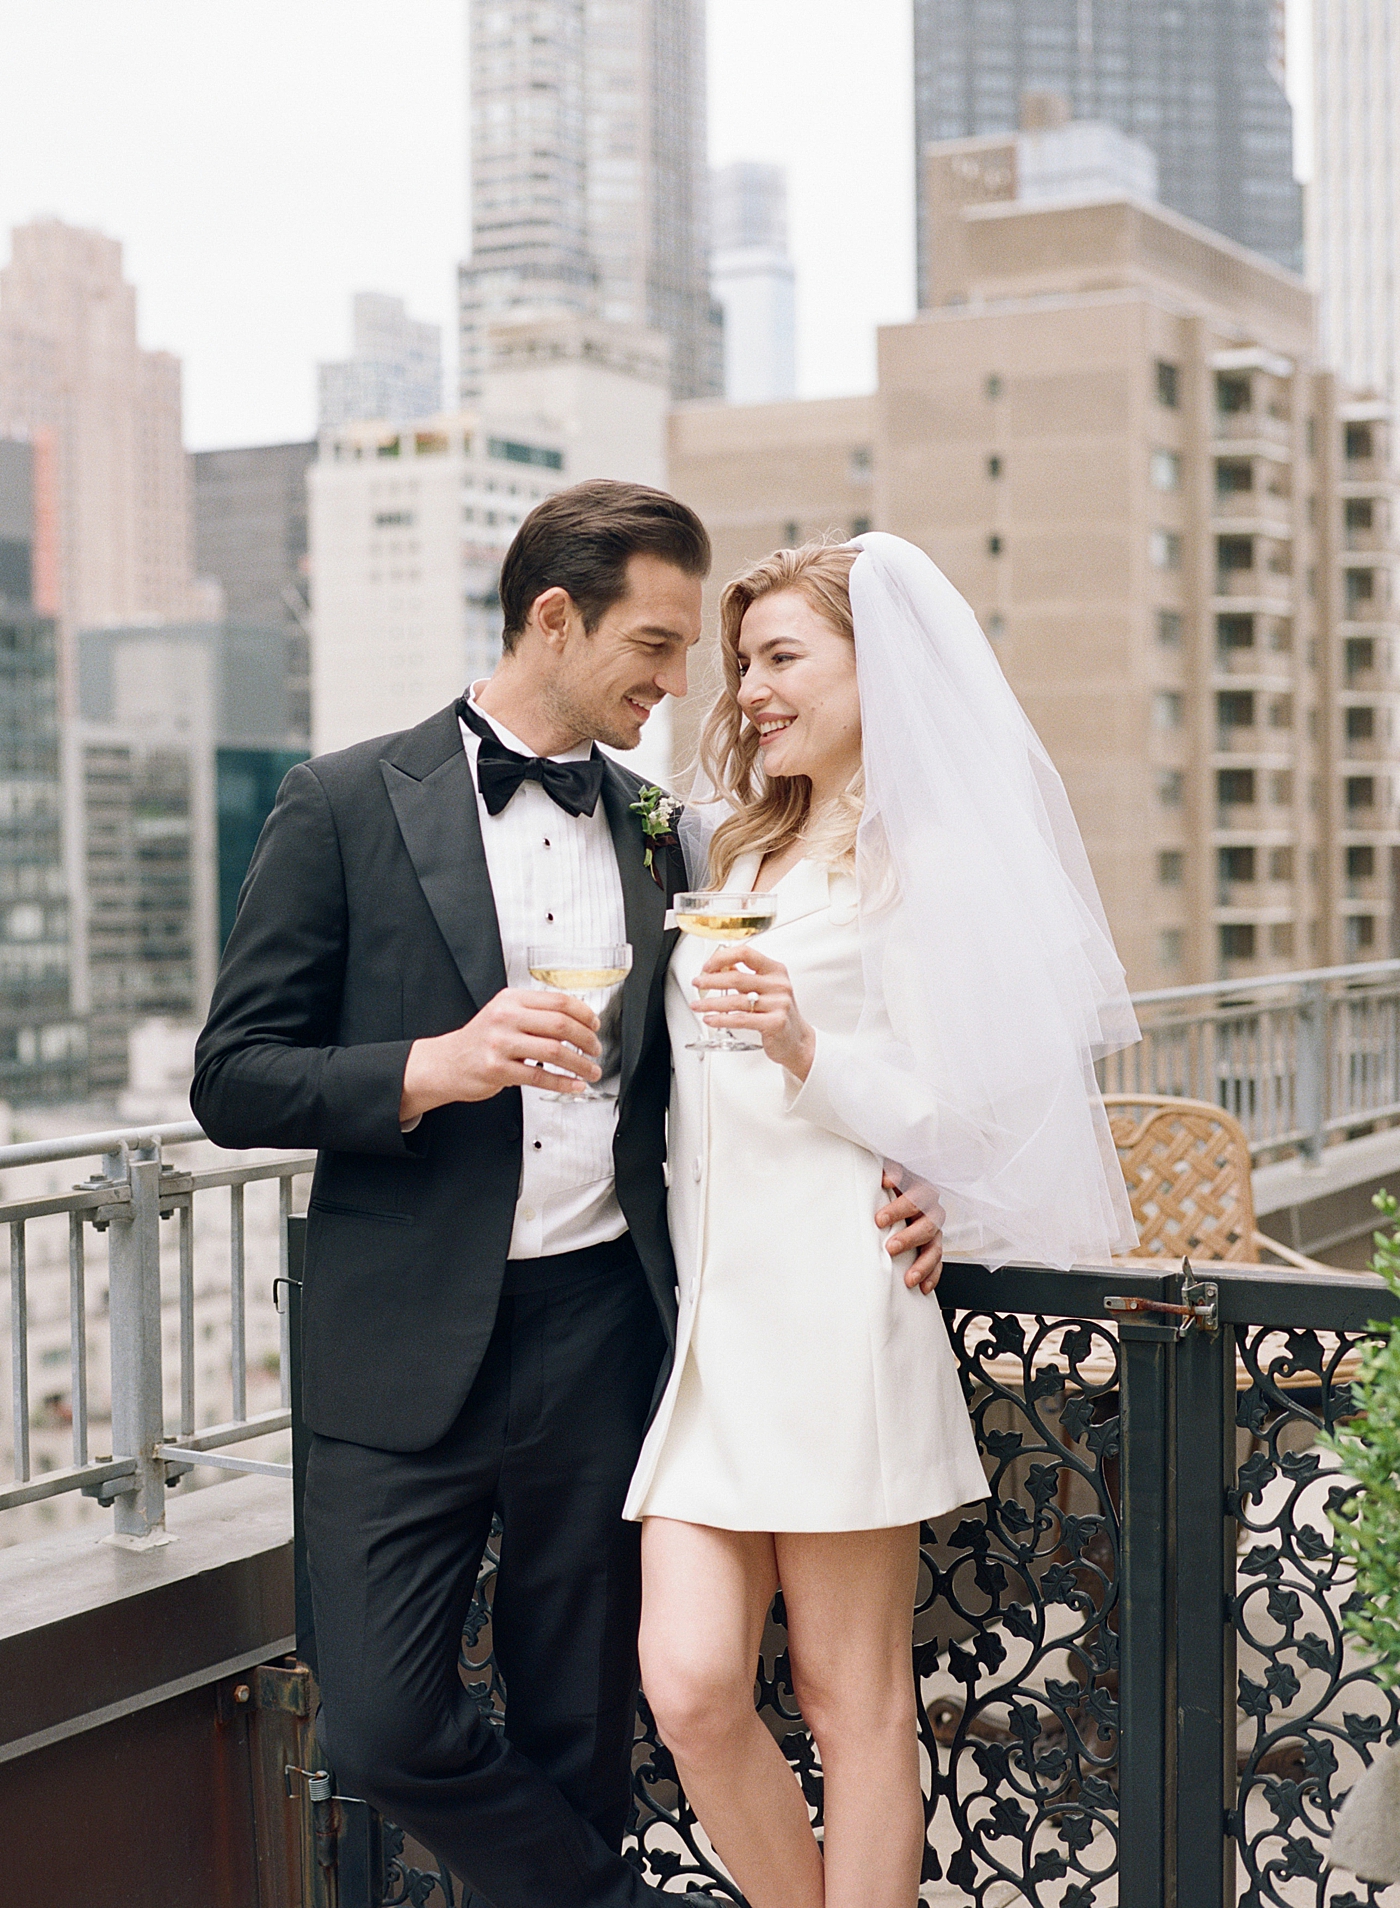 Bride and groom toasting on a balcony in NYC | Photo by Hope Helmuth Photography